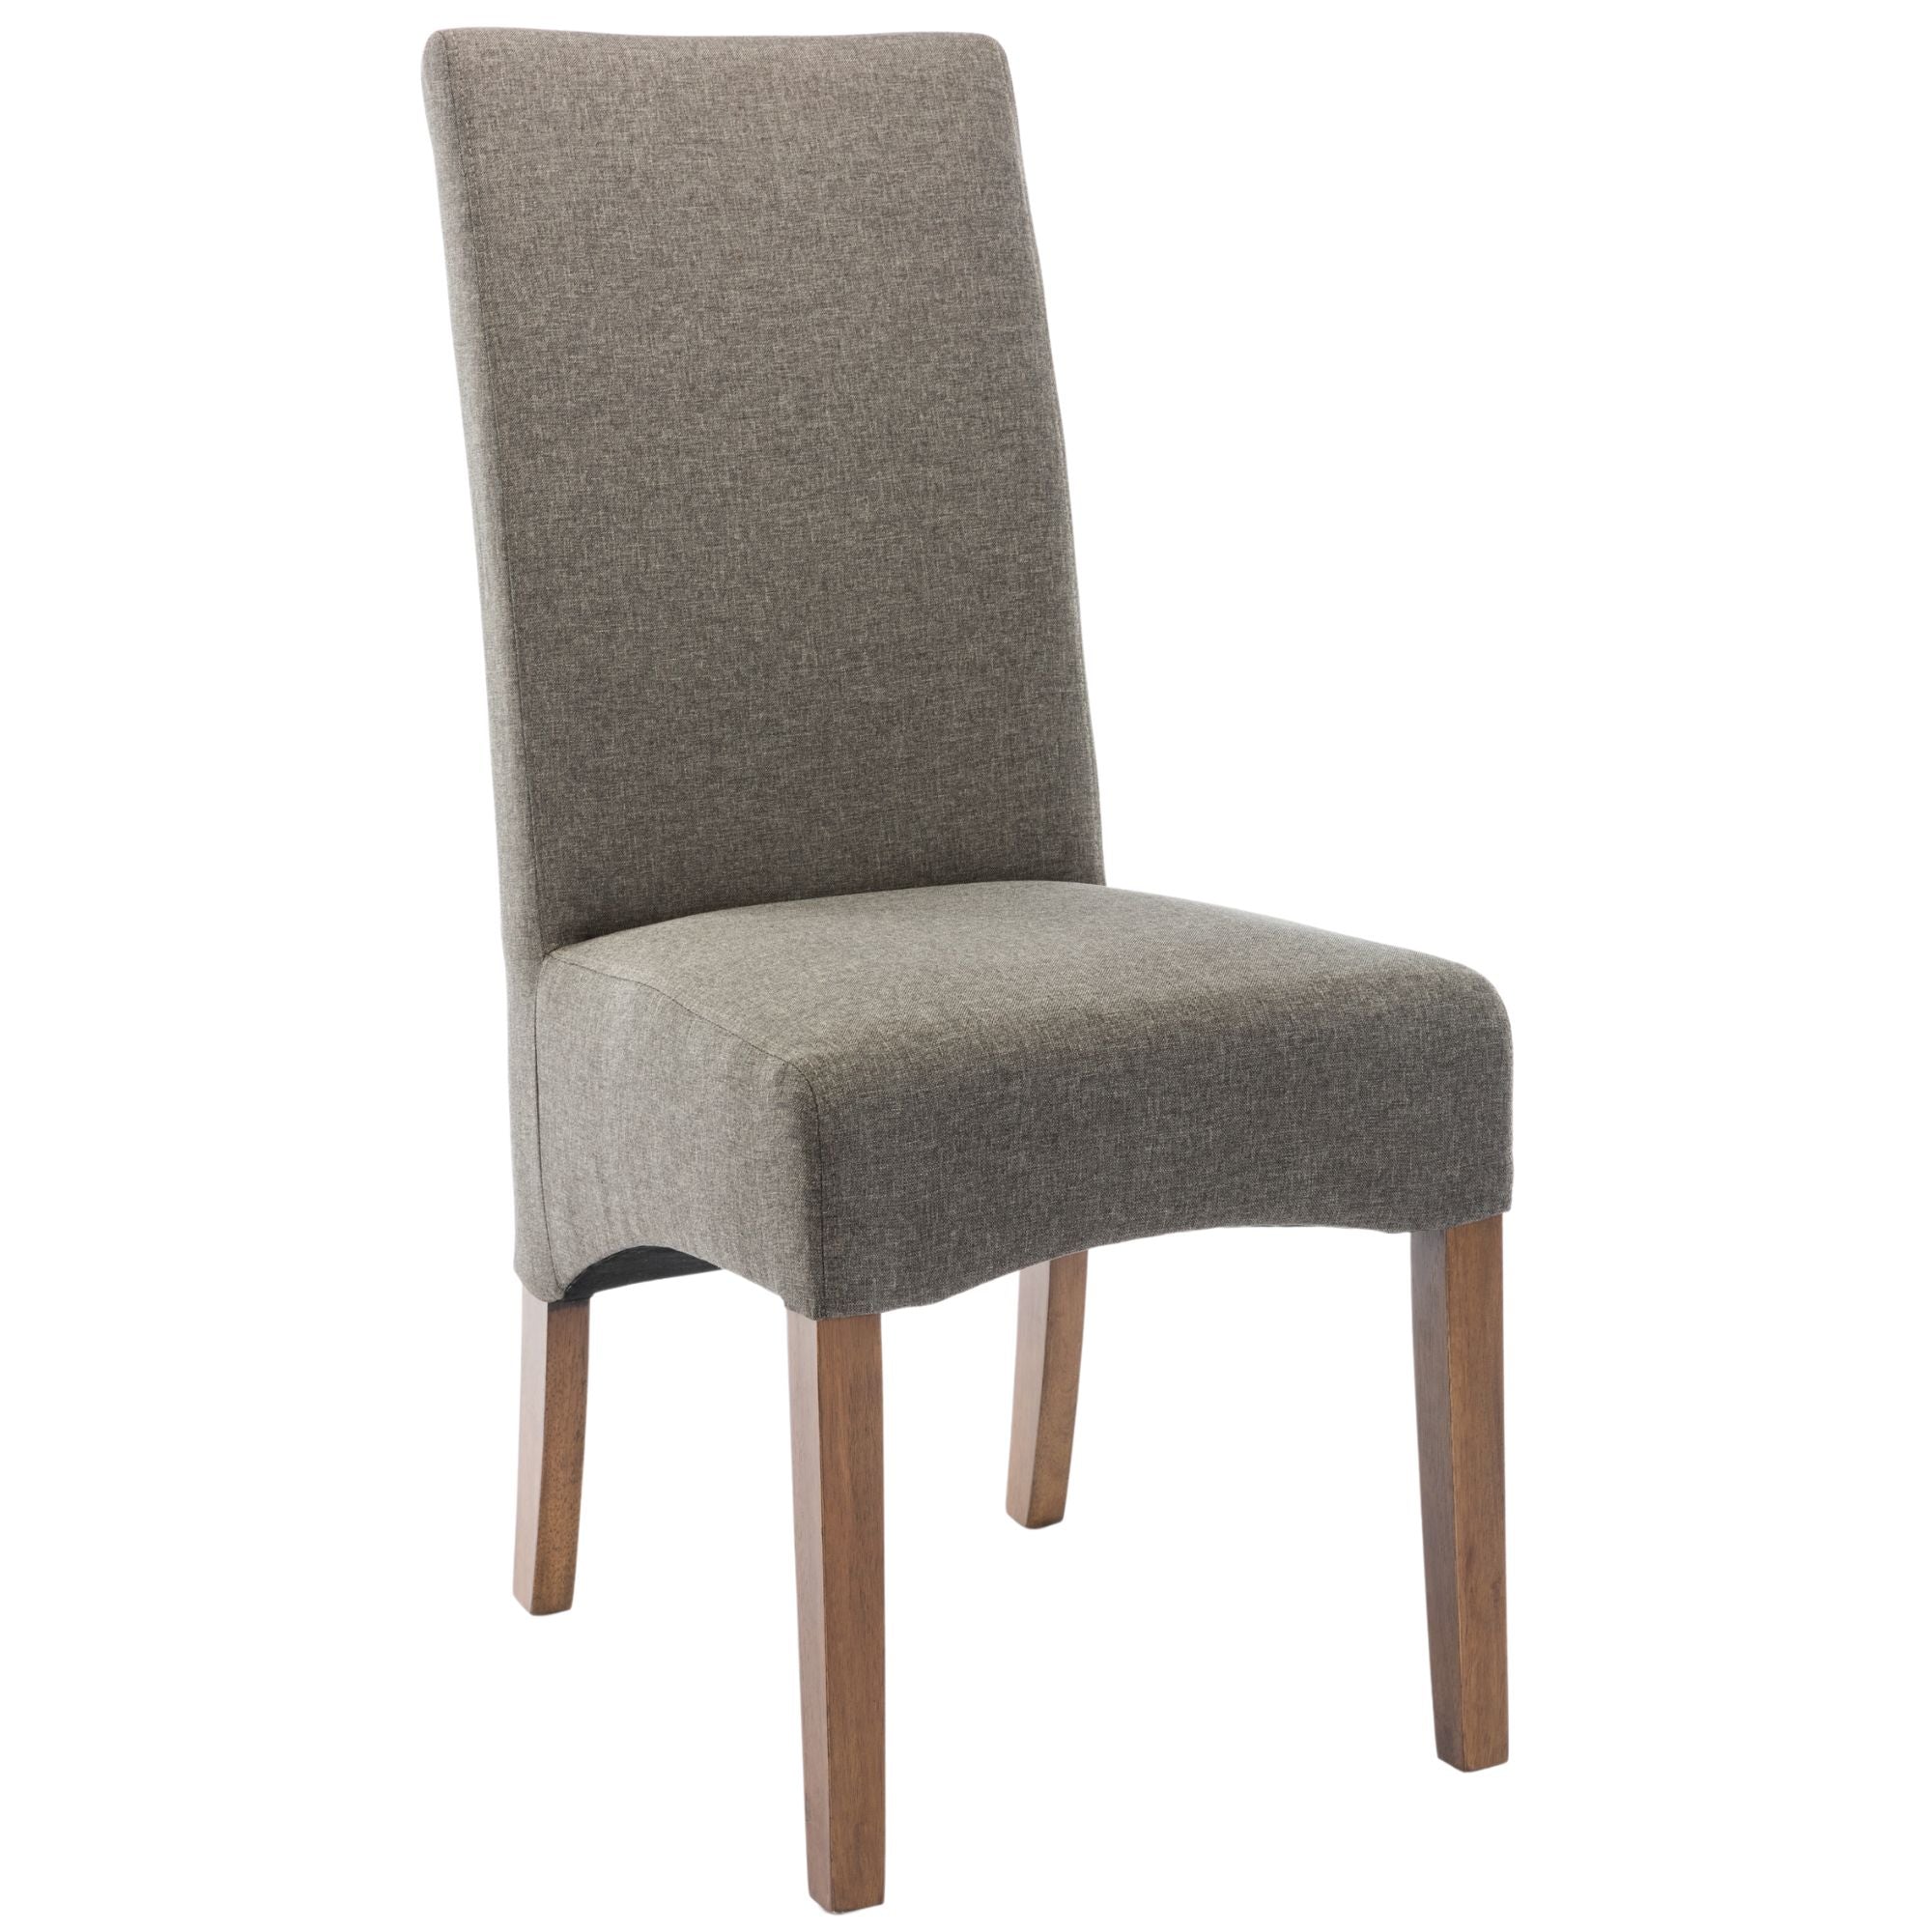 Aksa Fabric Upholstered Dining Chair Set of 2 Solid Pine Wood Furniture - Grey Deals499